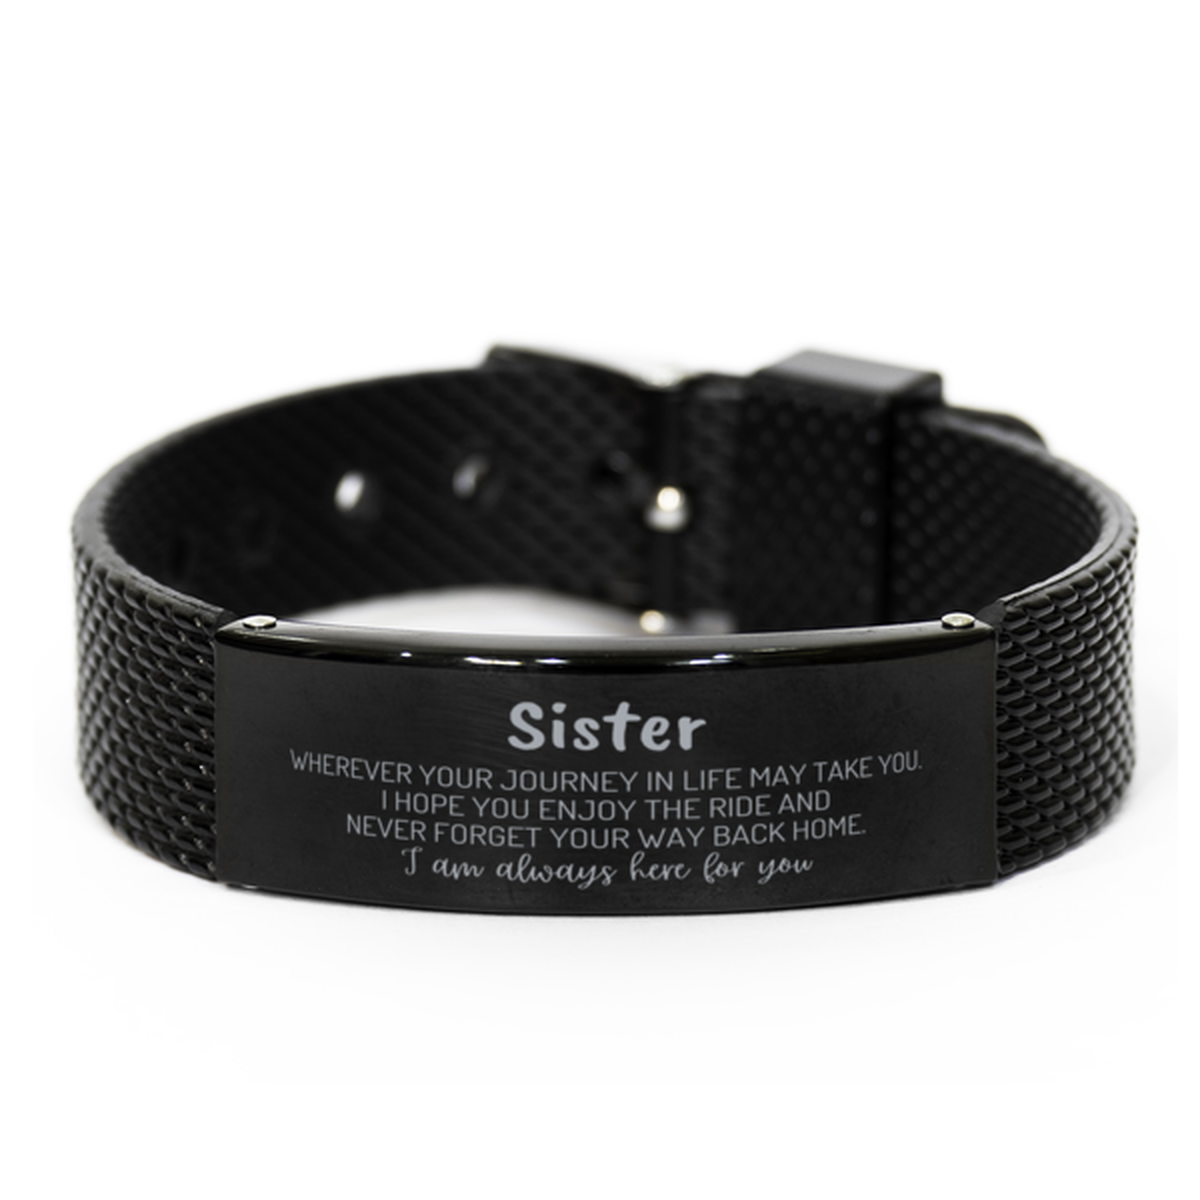 Sister wherever your journey in life may take you, I am always here for you Sister Black Shark Mesh Bracelet, Awesome Christmas Gifts For Sister, Sister Birthday Gifts for Men Women Family Loved One